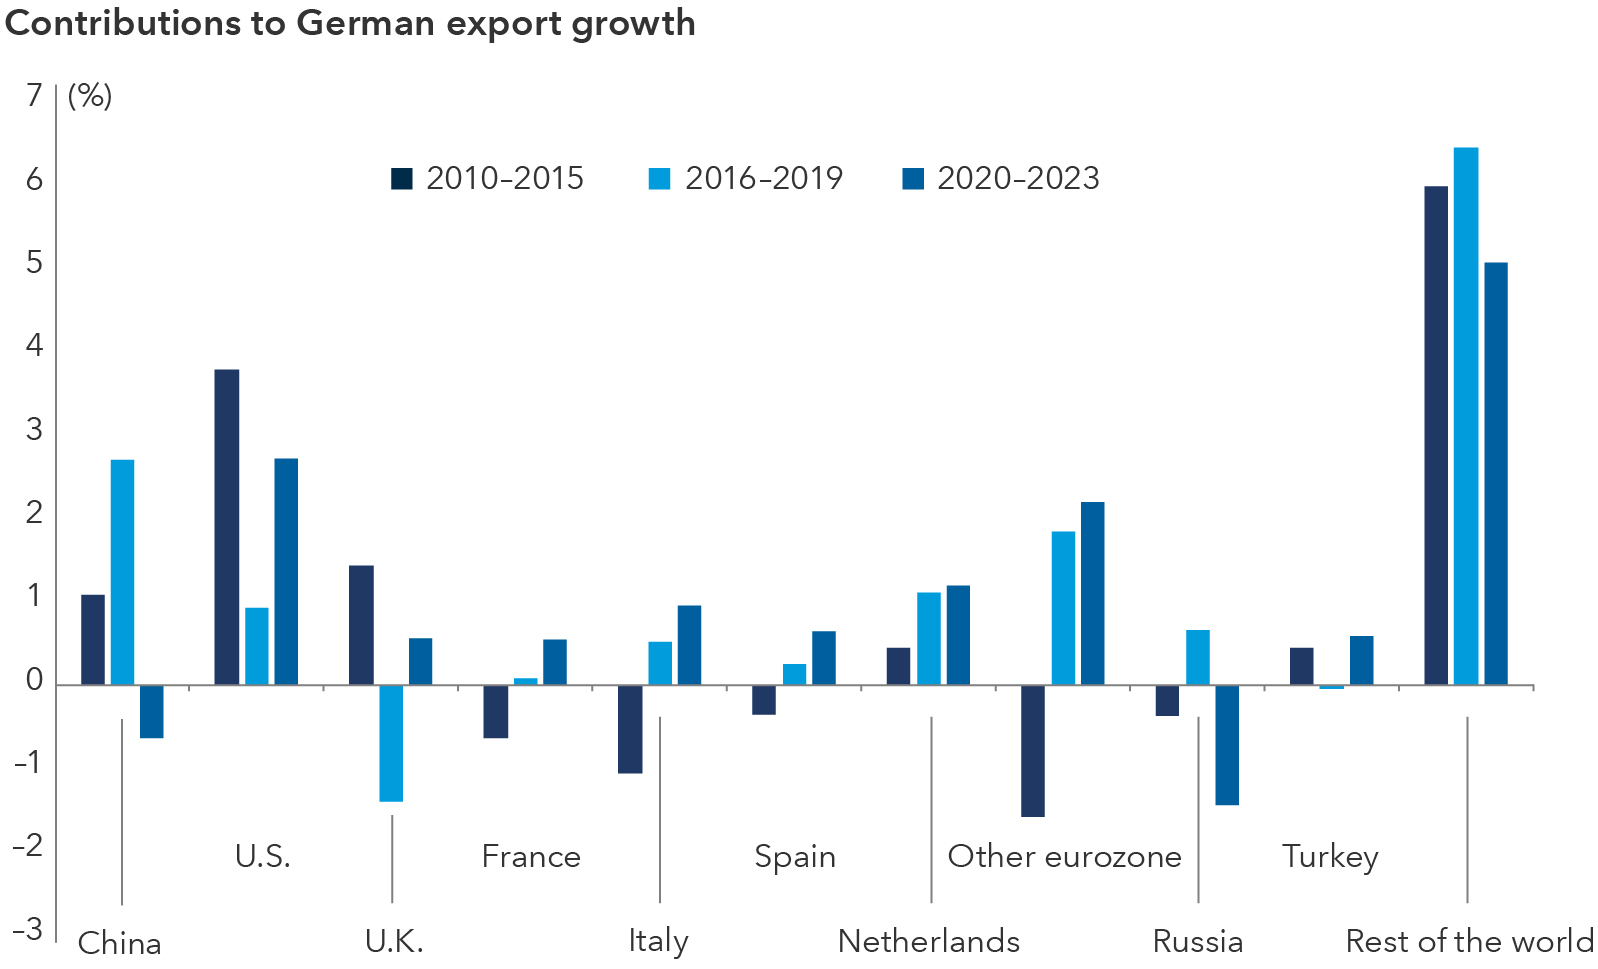 The bar chart above represents the contributions to growth of German goods exports over three distinct time periods: the first quarter of 2010 through the fourth quarter of 2015, the first quarter of 2016 through the fourth quarter of 2019, and the first quarter of 2020 through 2023. The bars are clustered in groups of all three periods for each market or region, and their height or depth indicates the percentage points by which that market contributed to overall export growth. The x-axis lists regions that have contributed to the growth of German goods exports: China, the United States, the United Kingdom, France, Italy, Spain, the Netherlands, other eurozone, Russia, Turkey, and the rest of the world. The y-axis ranges from -3 to 7 percentage points. Over the three time frames in the chart, Germany’s exports to the “rest of world” have significantly grown. China remains a consistent export partner for Germany, but that relationship trends downward since 2020. Exports to other European countries have fluctuated but all trend upward since 2016. Exports to the United States have been volatile. However, in the most recent period since 2020, exports to the U.S. rebounded, contributing positively. 